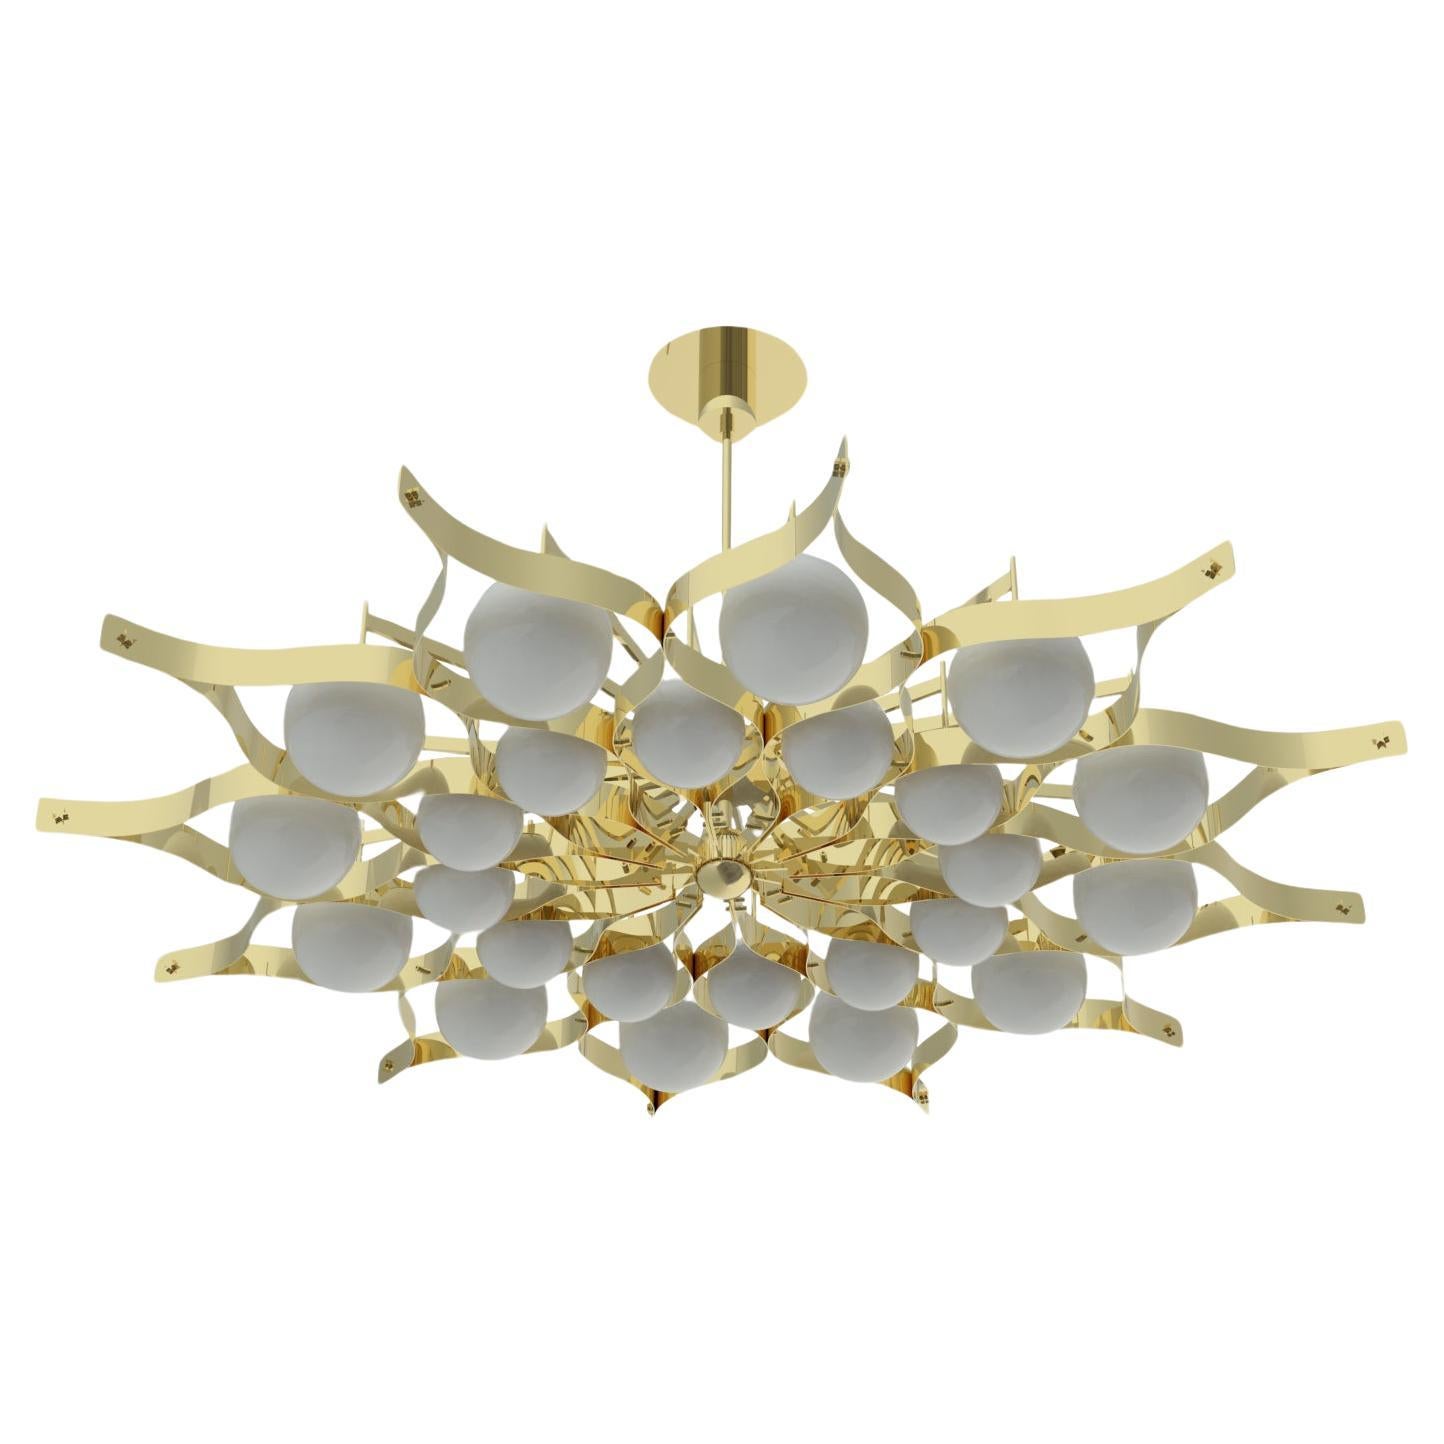 21st Century Pavone Large Pendant Lamp, UL, phase cut, Gio Ponti, 2019, Italy For Sale